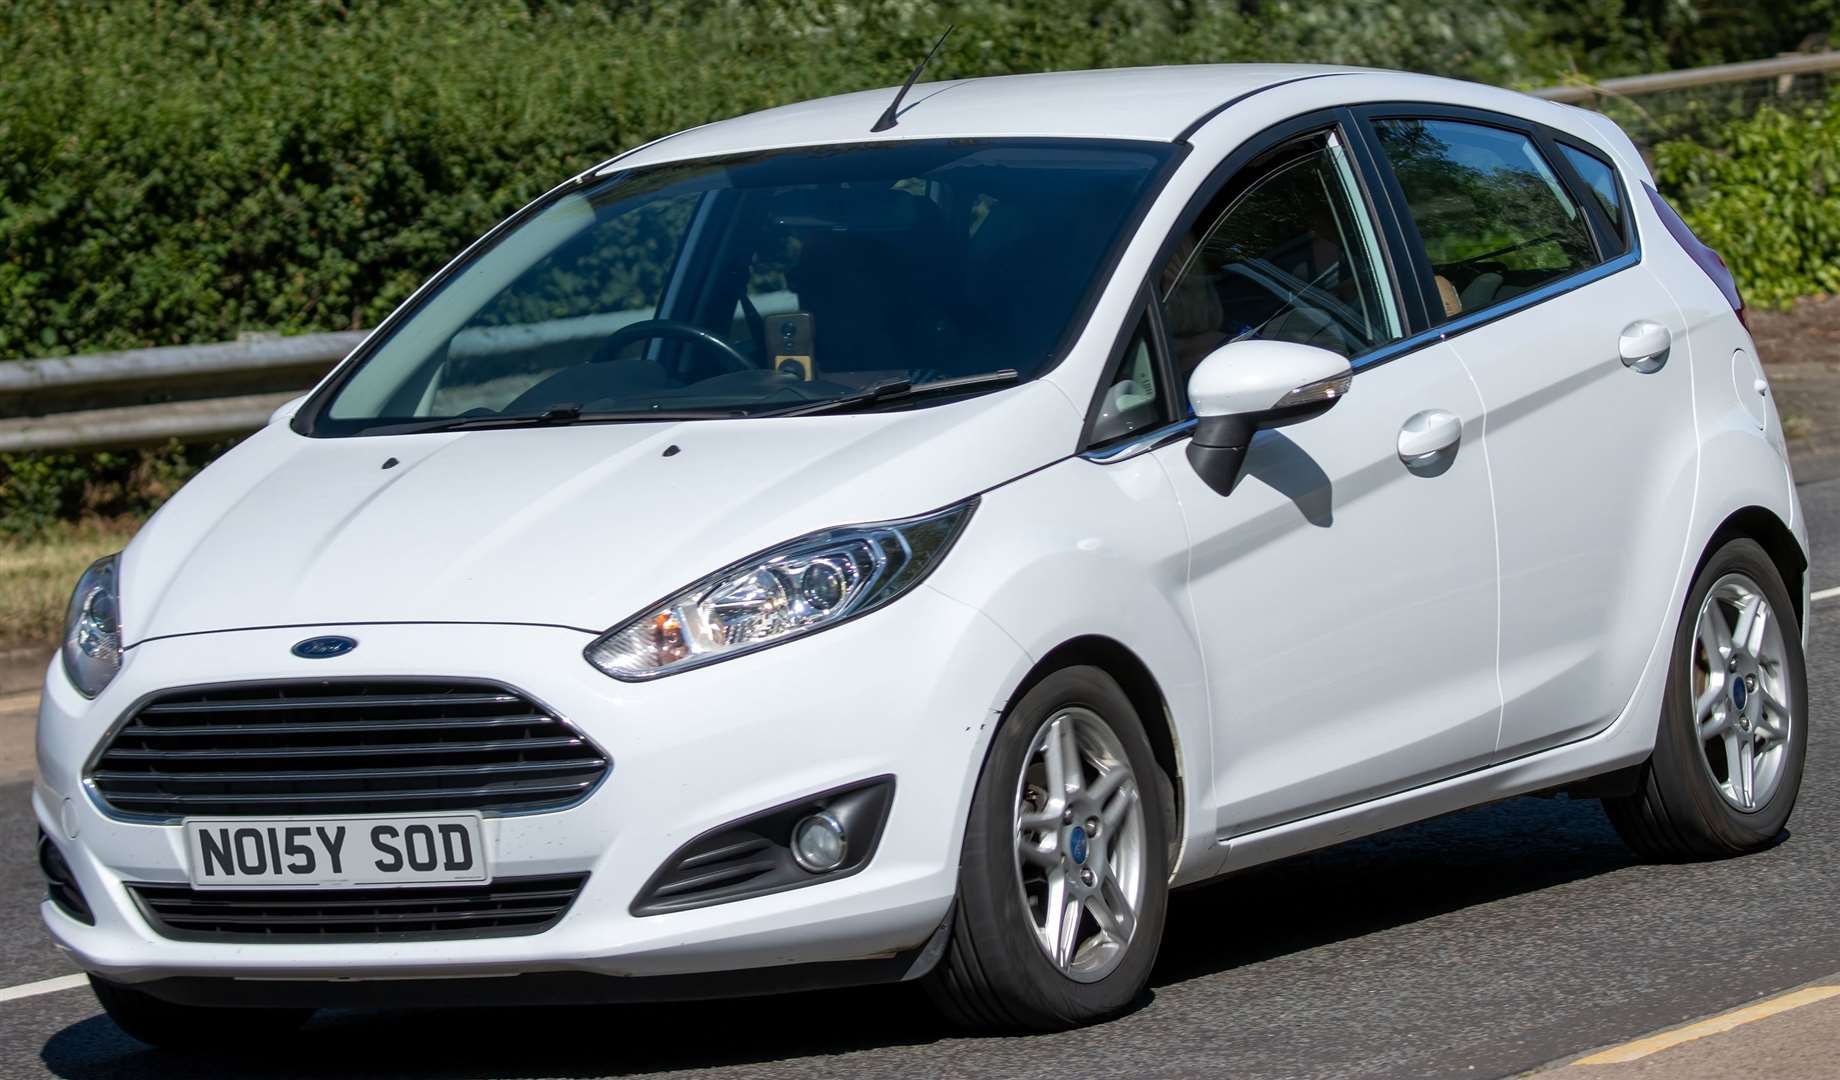 It is rumoured to be a white Ford Fiesta driver causing the disruption. Stock image